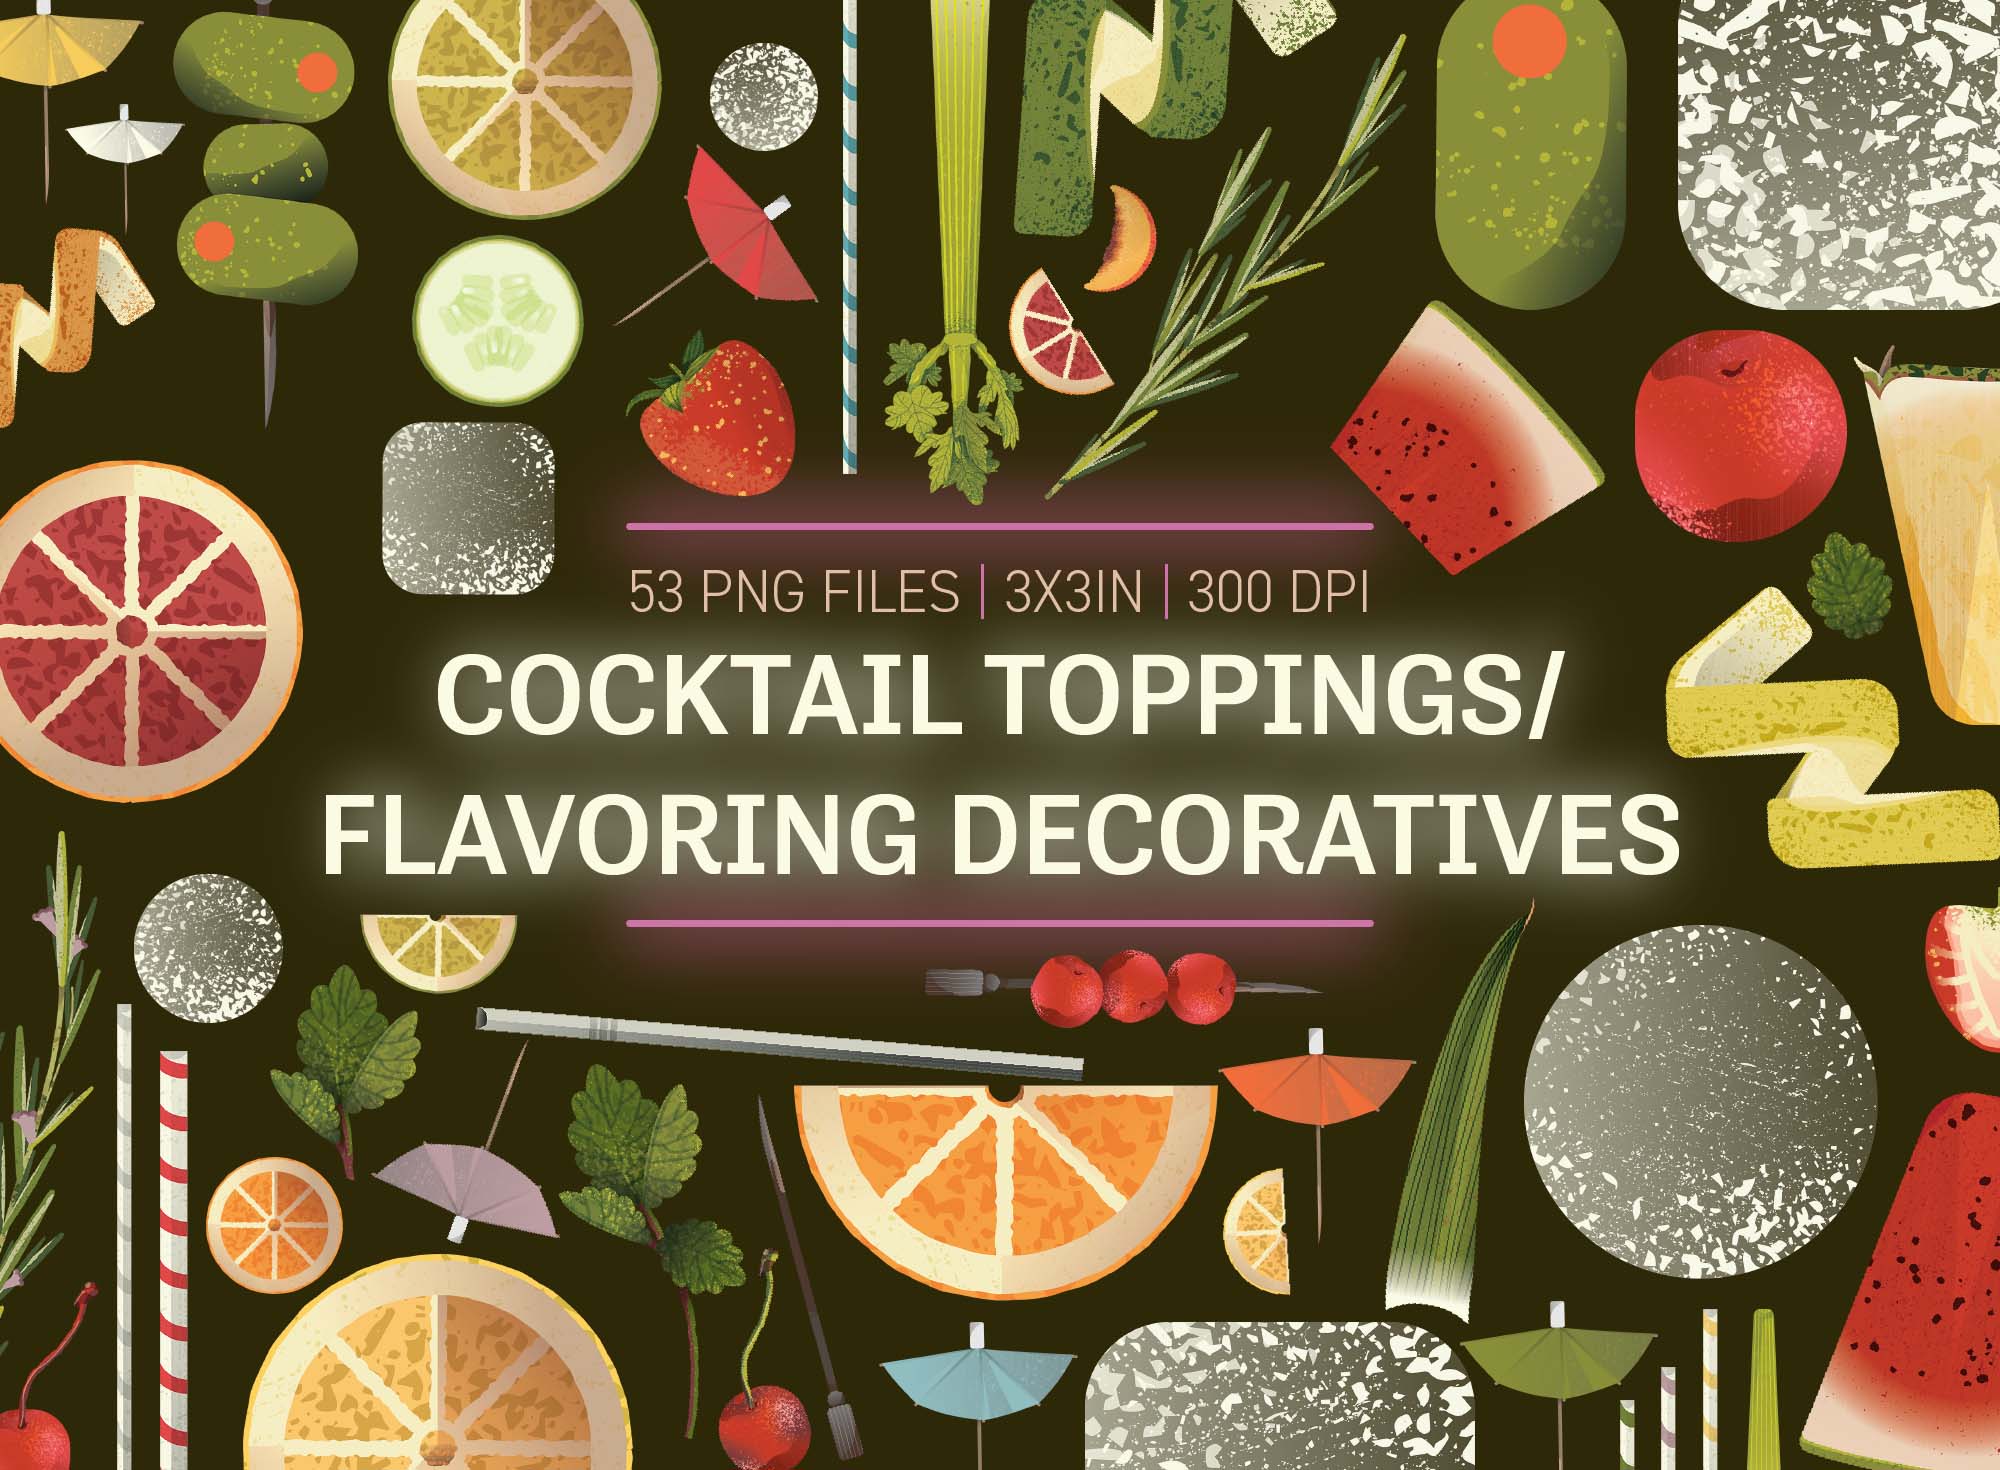 Create-Your-Own-Cocktails-PNG-listing-lelinhtdigitals_cocktail-flavor-topping-decoratives-clip-arts